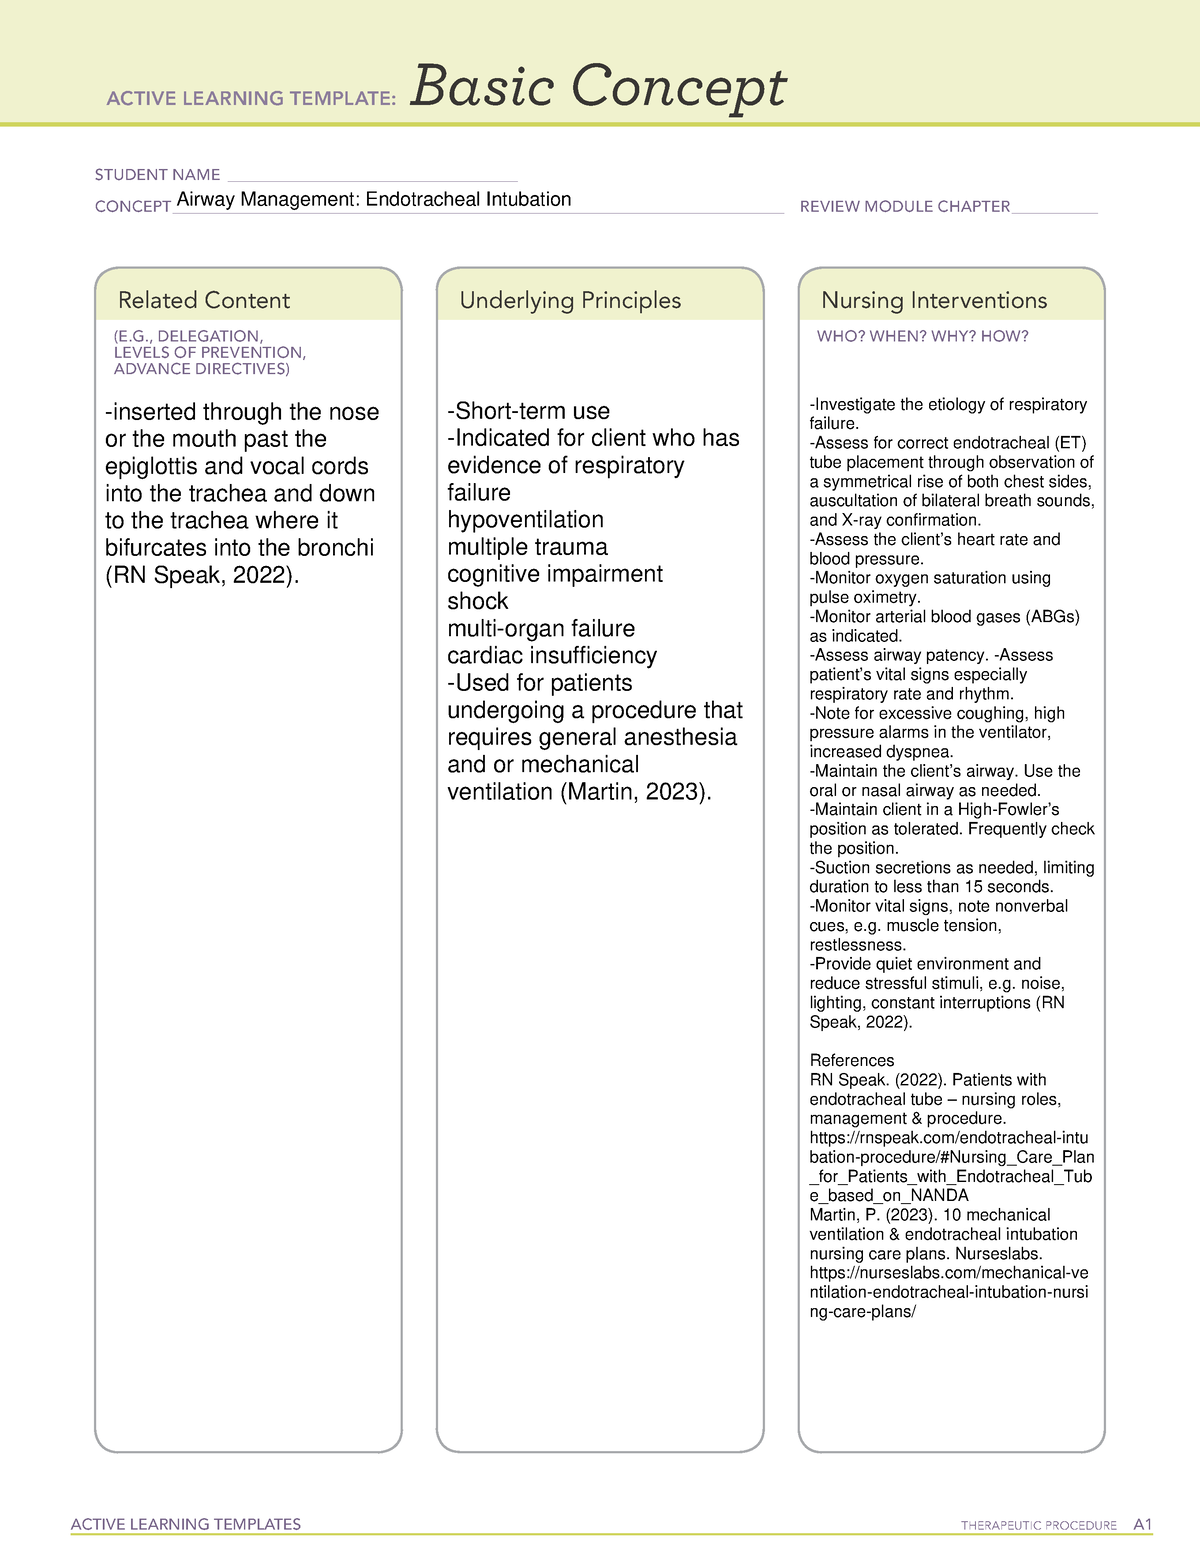 Airway management CA Concept Analysis ACTIVE LEARNING TEMPLATES